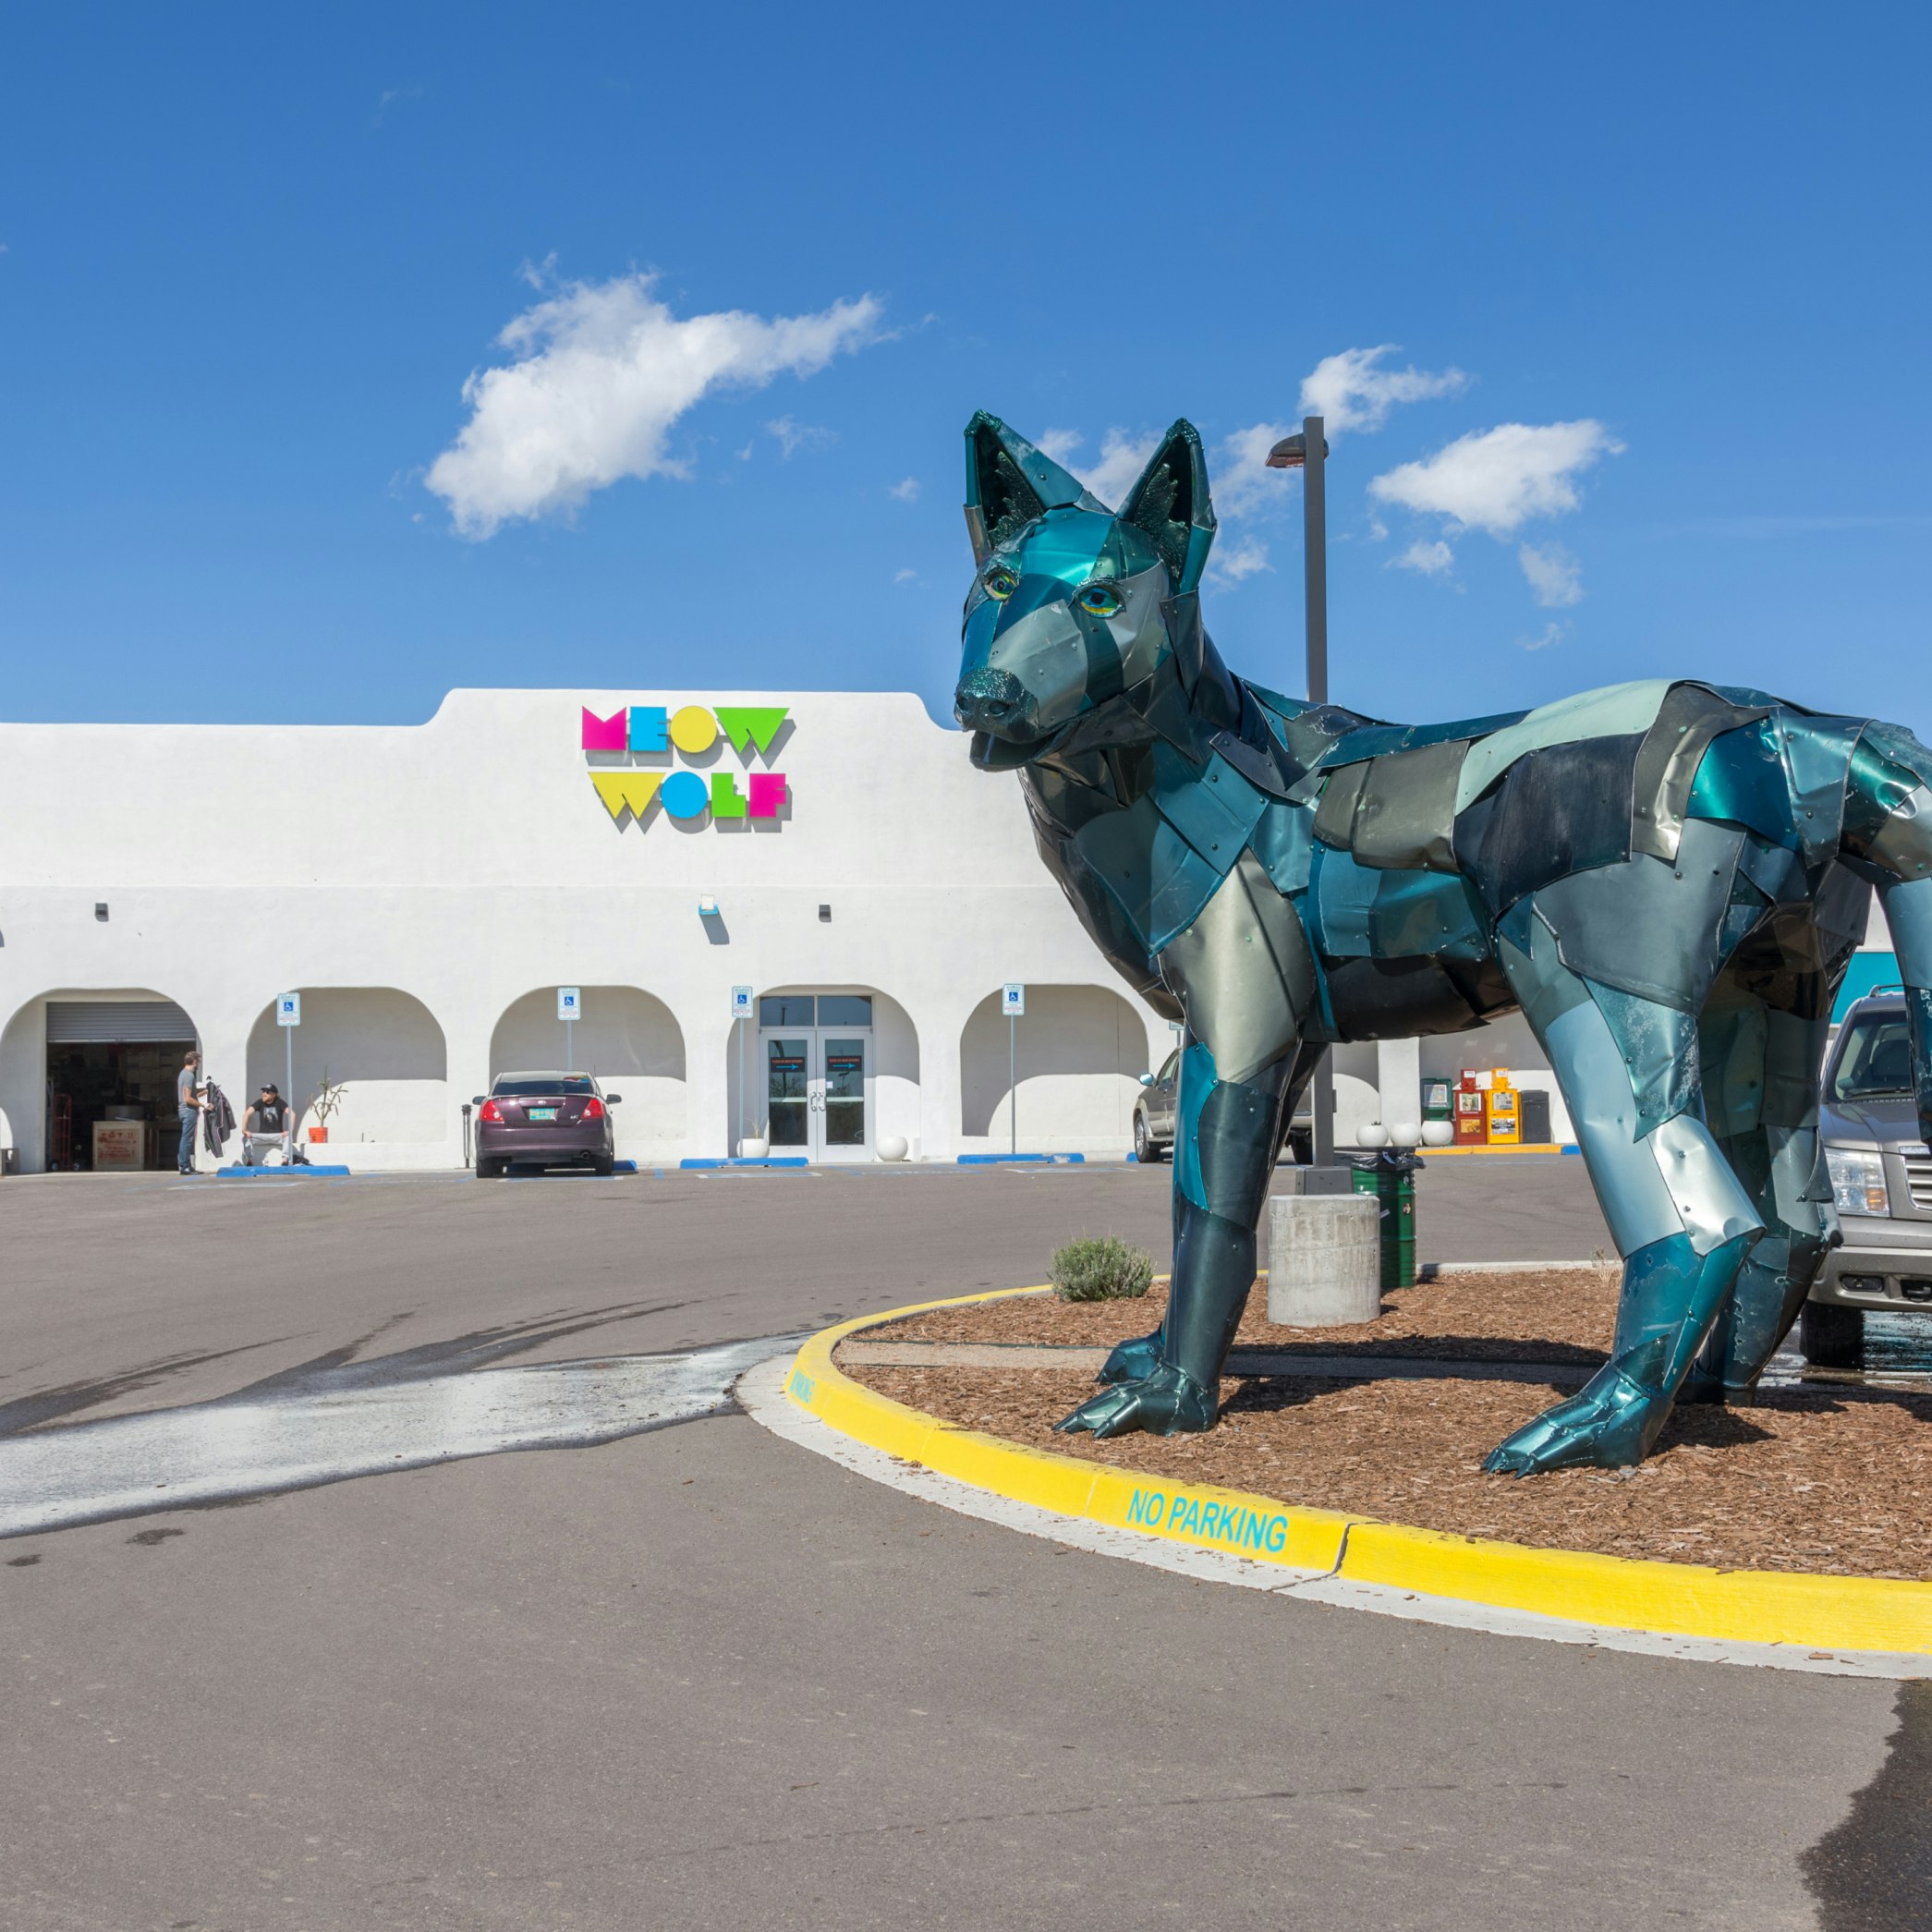 Santa Fe, New Mexico– April 30th, 2017: Meow Wolf art collective in Santa Fe, New Mexico, United States. Open to the public the main exhibit is the The House of Eternal Return..; Shutterstock ID 632888321; Your name (First / Last): Alexander Howard; GL account no.: 65050; Netsuite department name: Online Editorial; Full Product or Project name including edition: Southwest POIs